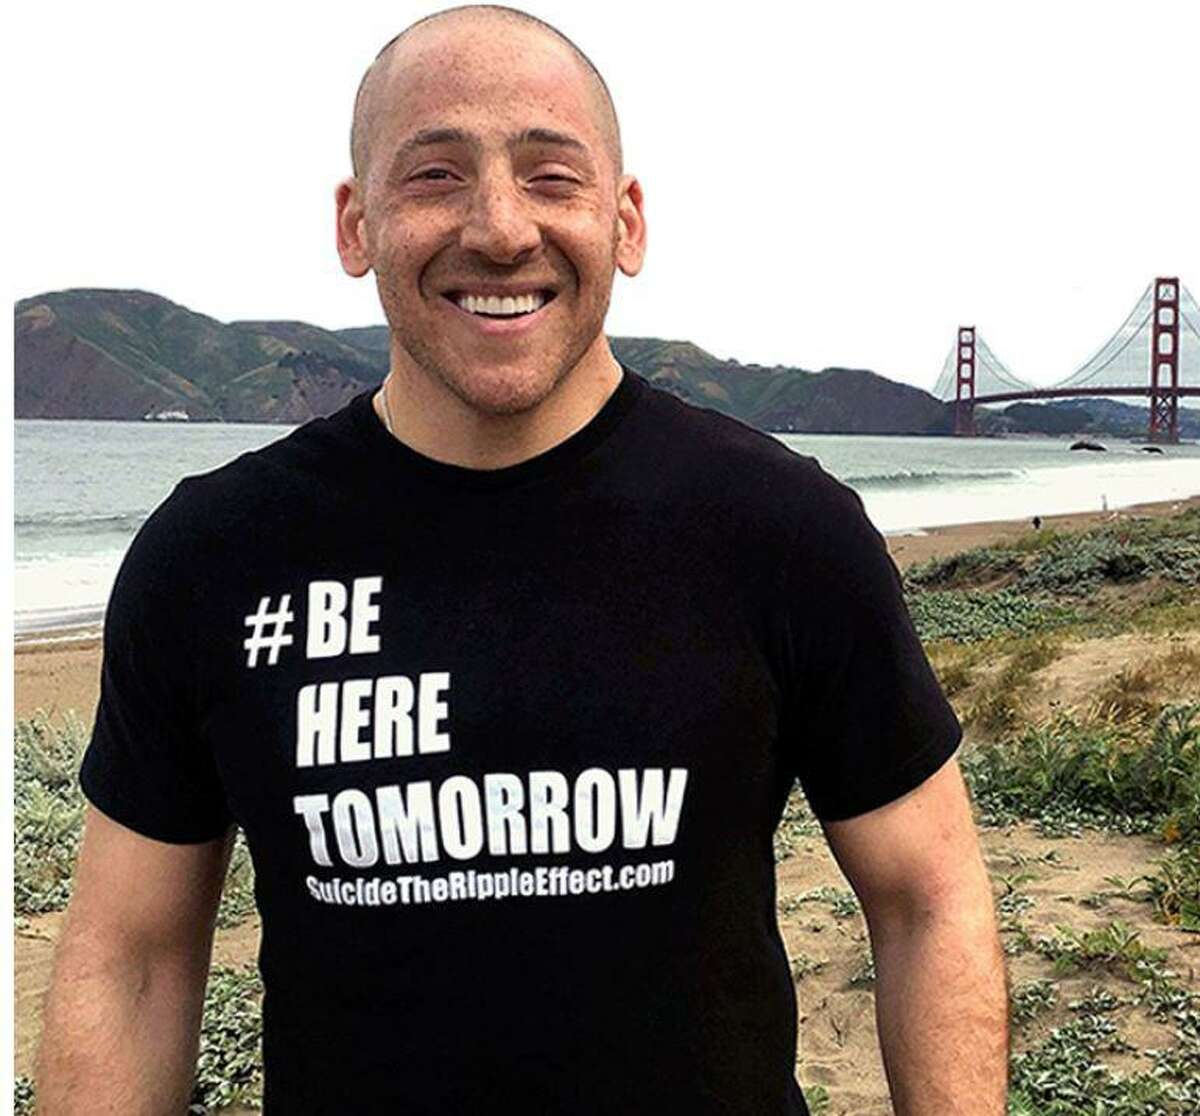 Kevin Hines is the keynote speaker of the second annual Community Health Expo on Thursday, Nov. 12, at the Lone Star Covention & Expo Center in Conroe. Hines is one of the few people who survived an attempted suicide jump off of the iconic Golden Gate Bridge in San Francisco.